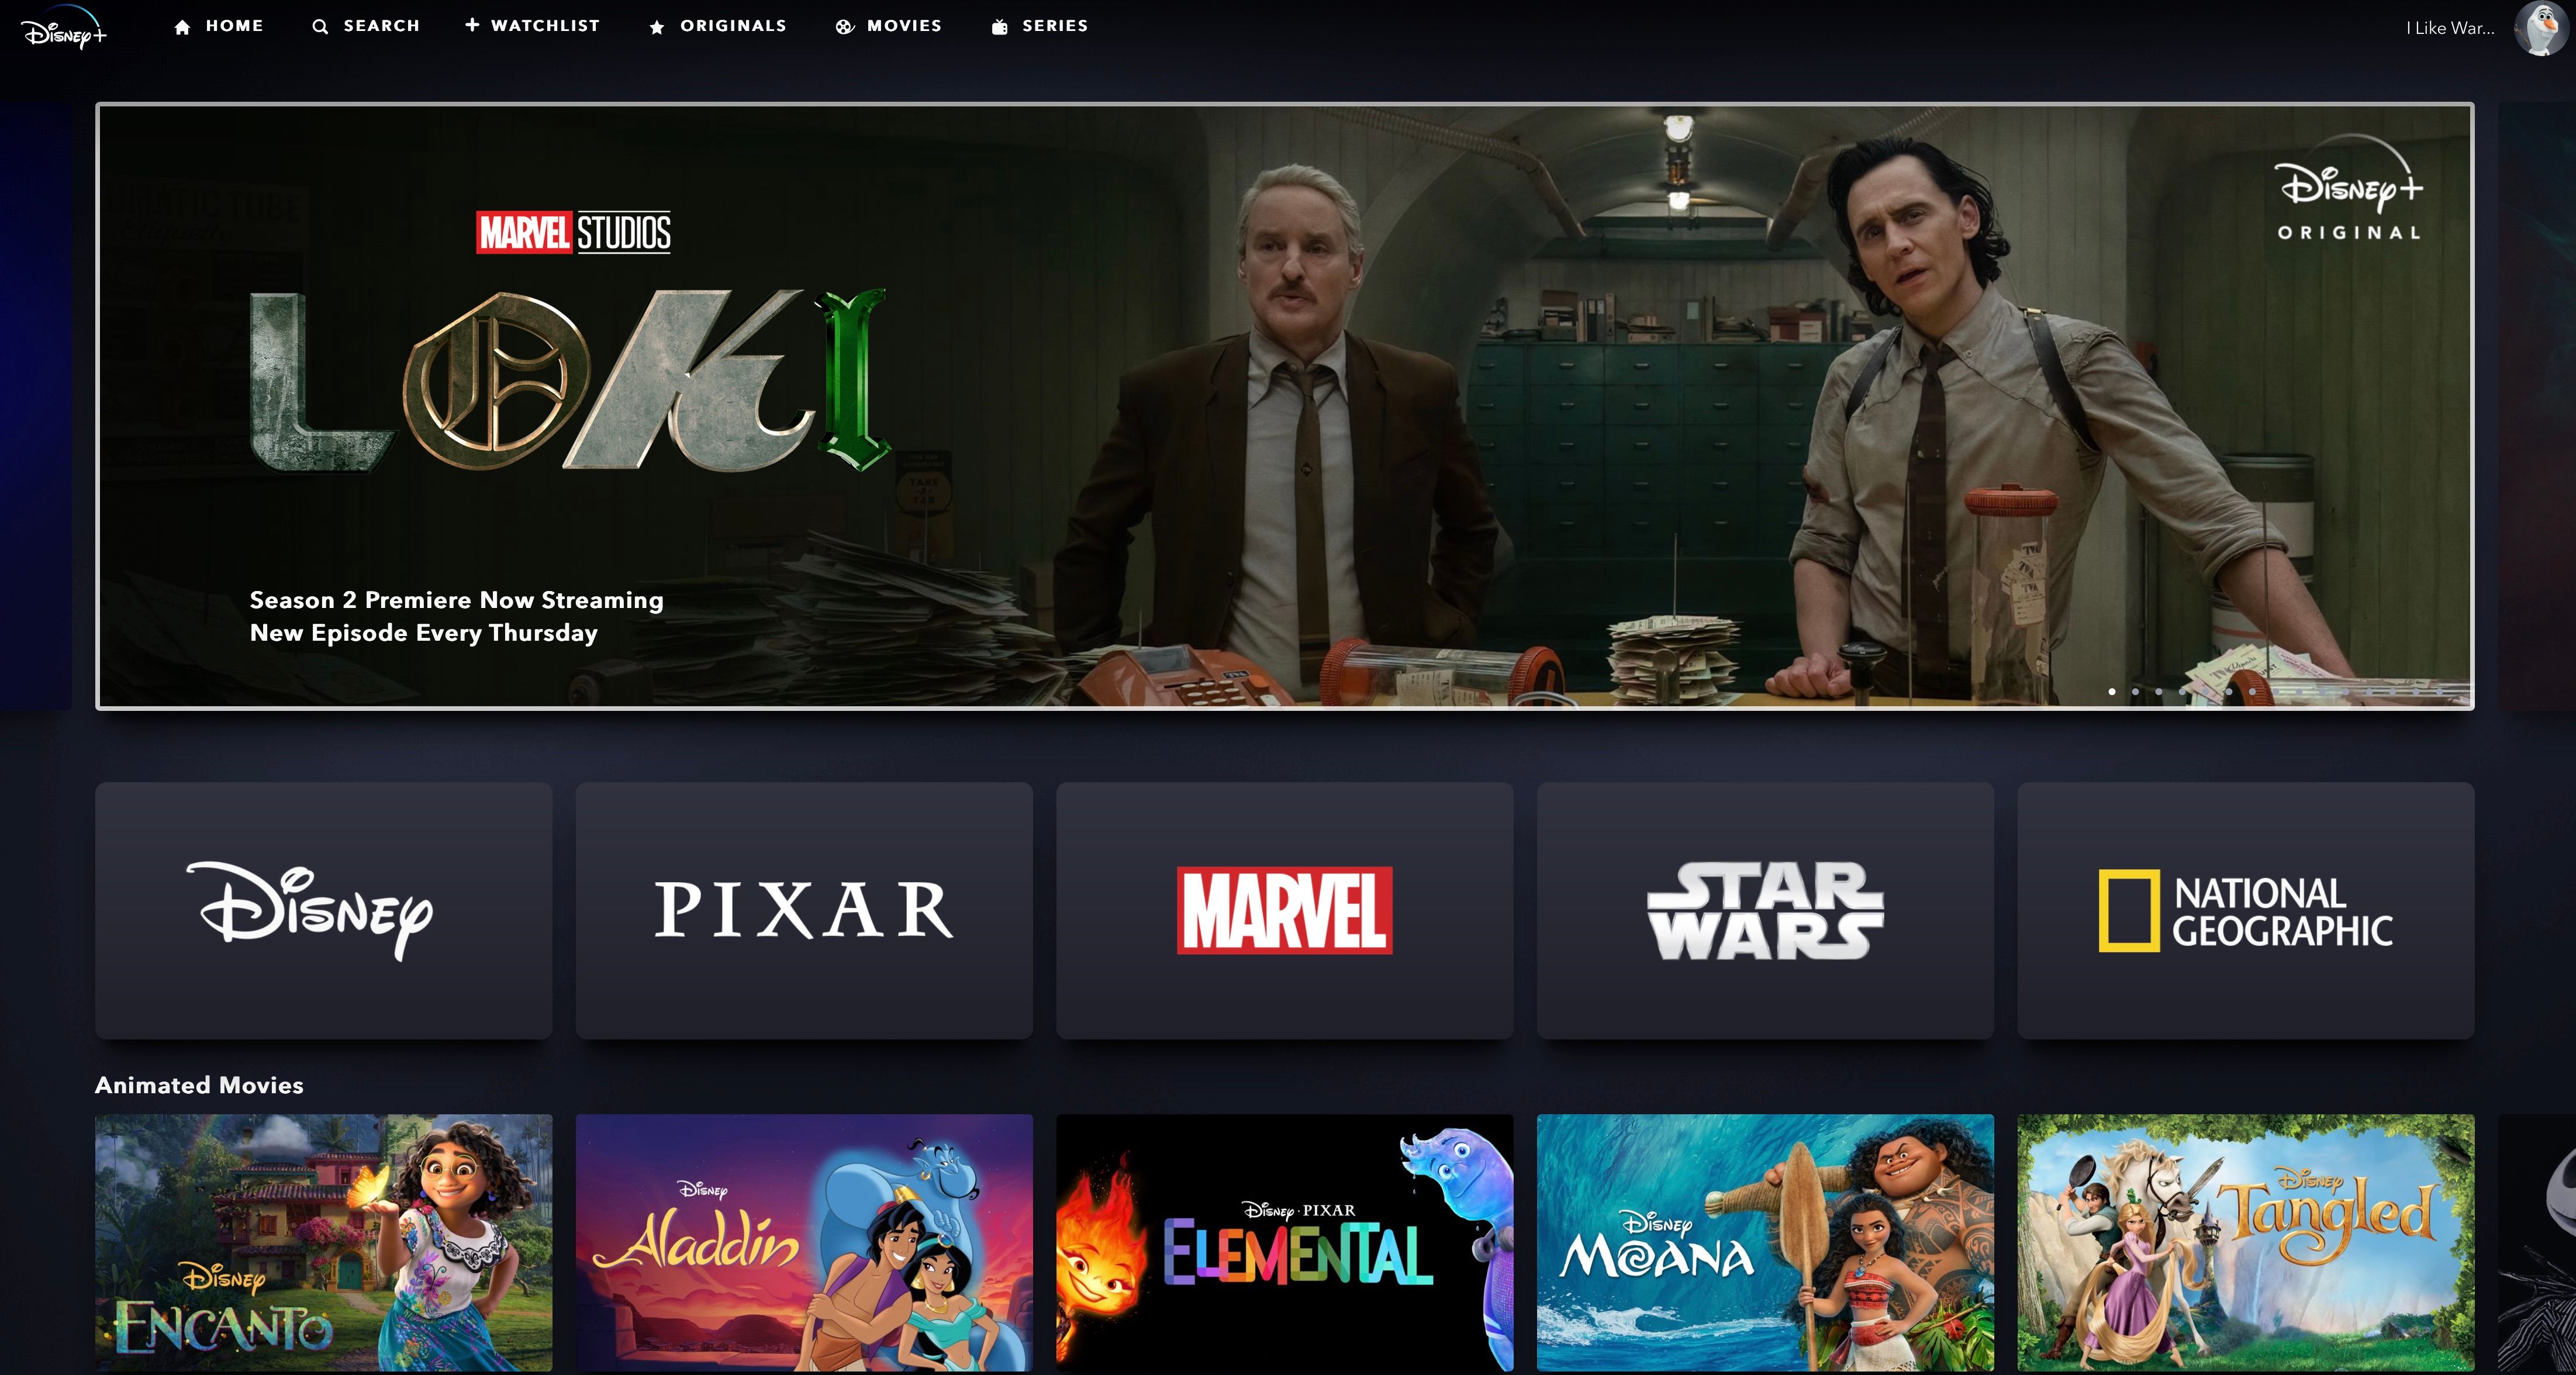 How to Enable or Disable Audio Descriptions on Disney+